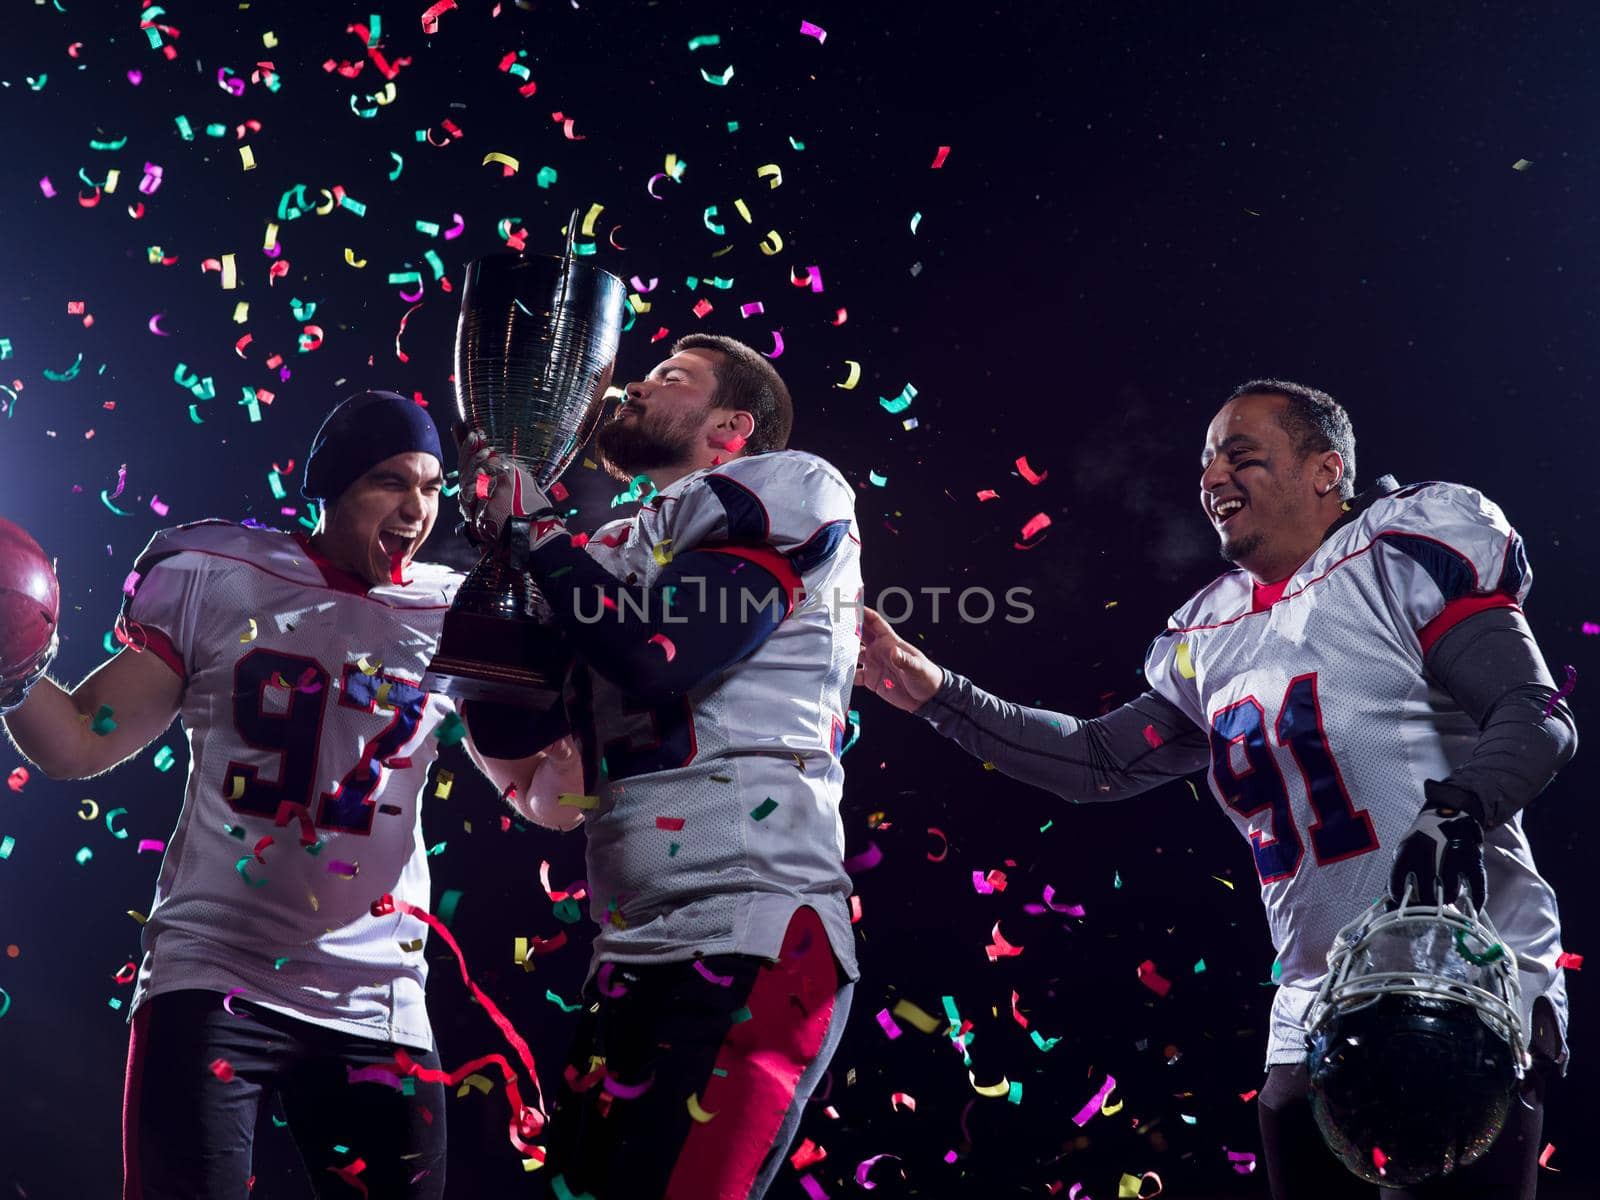 happy american football team celebrating victory with trophy and confetti on the night field